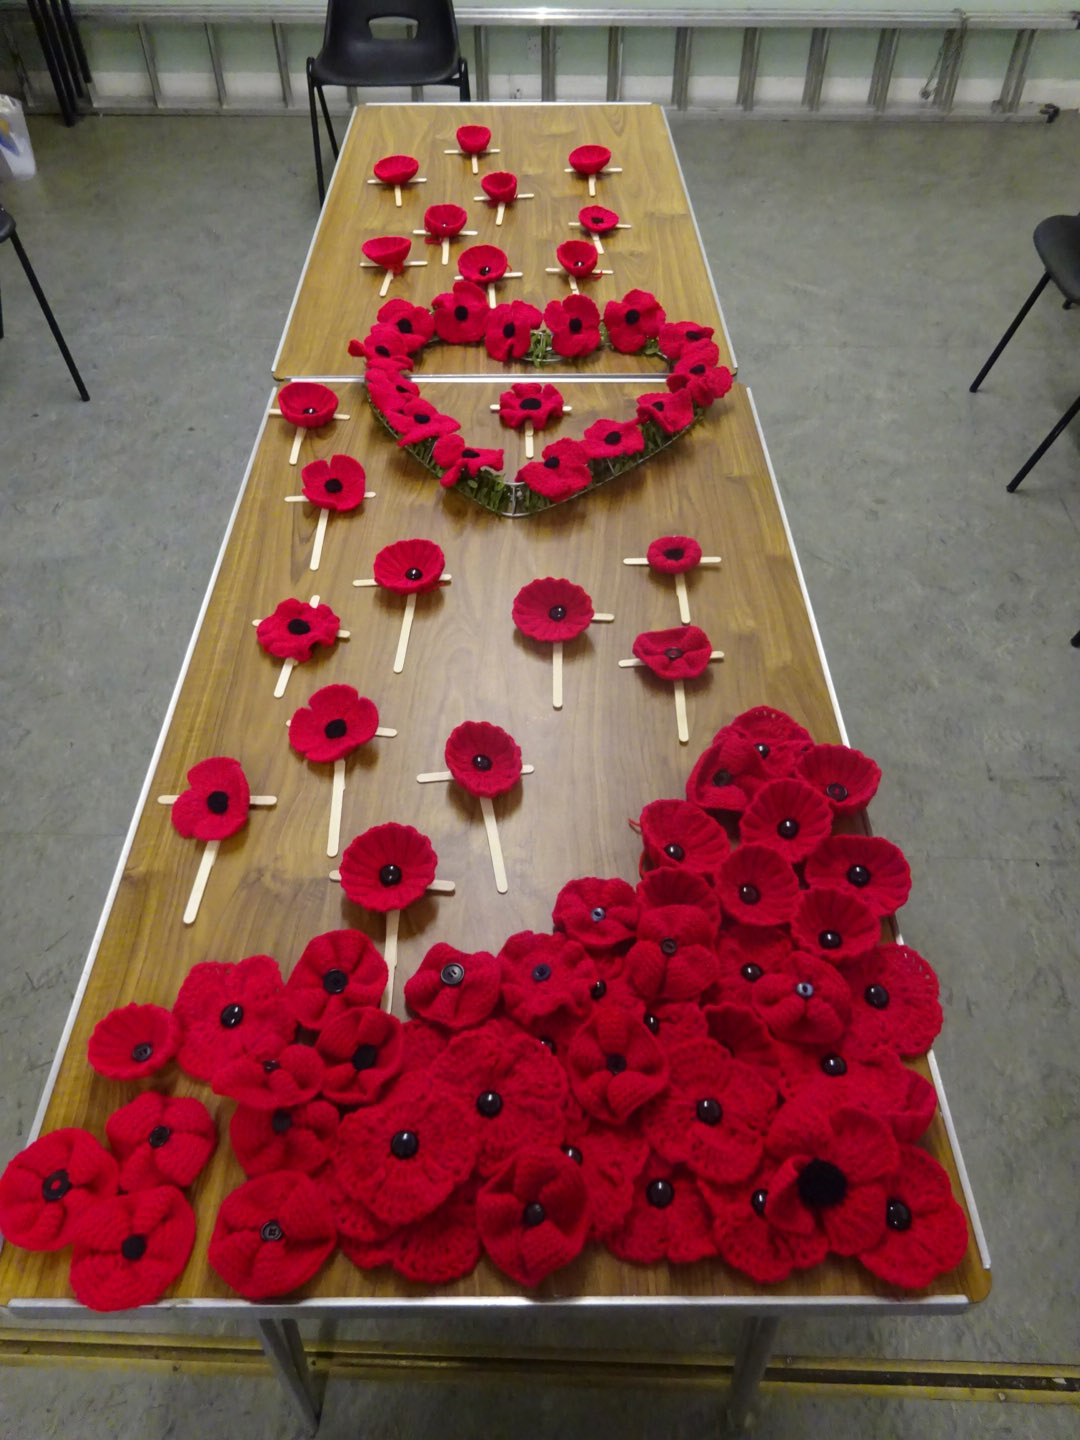 Just some of the poppies organised for the upcoming display in November, which will include crochet and knitted versions.